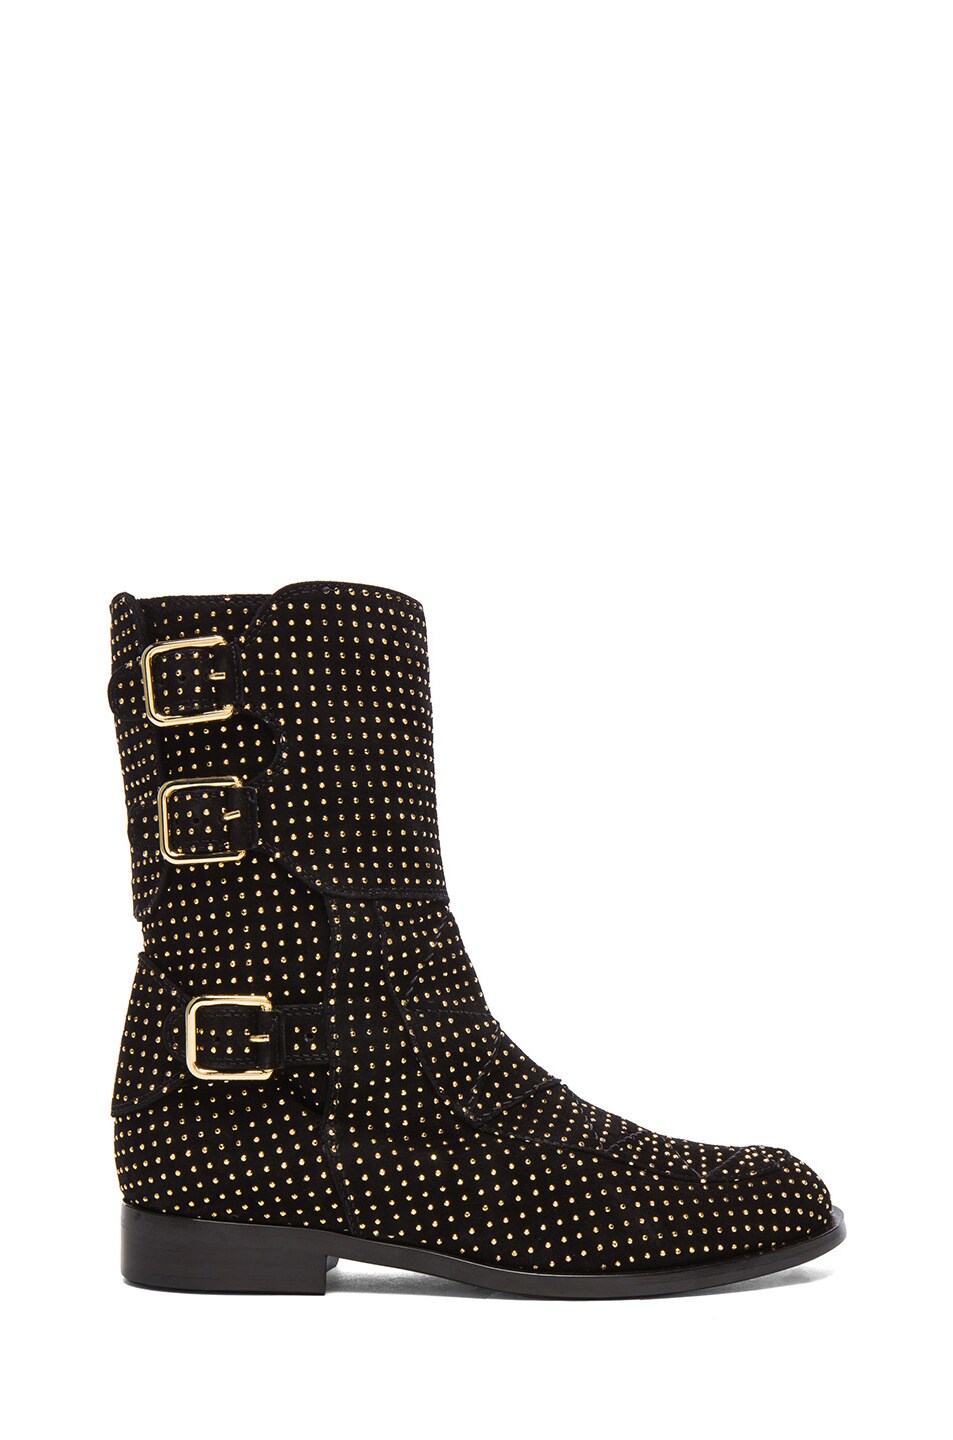 Image 1 of Laurence Dacade Rick Suede Studded Boots in Black & Gold